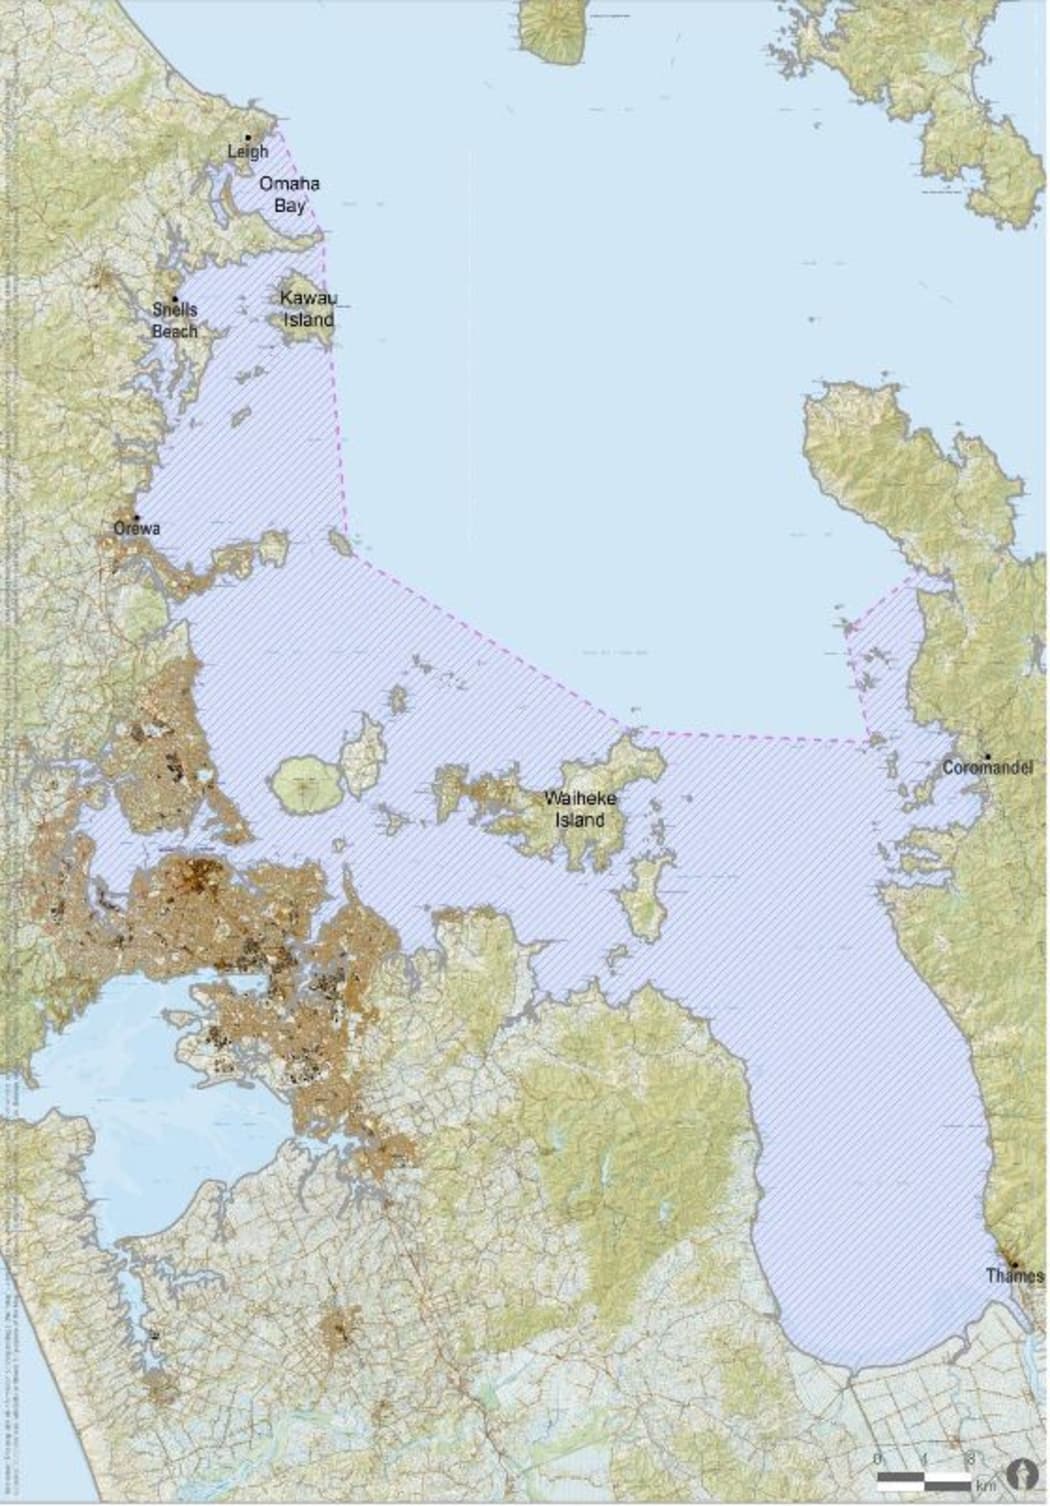 The proposed location for a Hauraki Gulf Recreational Fishing Park